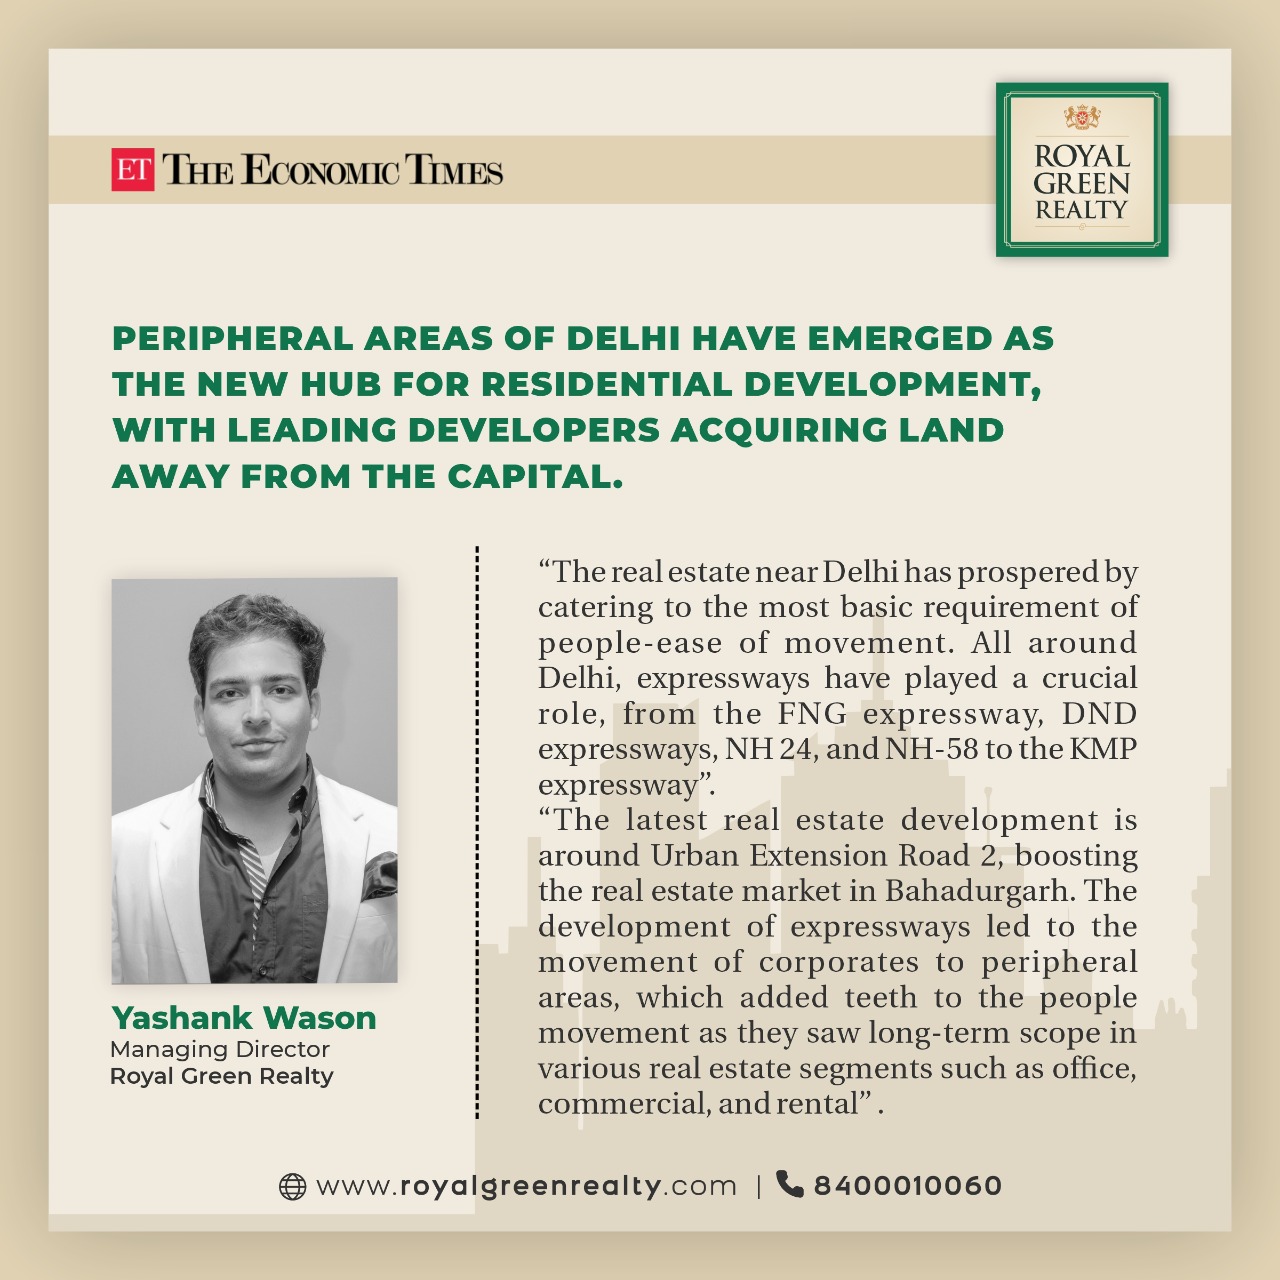 PERIPHERAL AREAS OF DELHI HAVE EMERGED A THE NEW HUB FOR RESIDENTIAL DEVELOPMENT WITH LEADING DEVELOPERS ACQUIRING LAND
AWAY FROM THE CAPITAL.